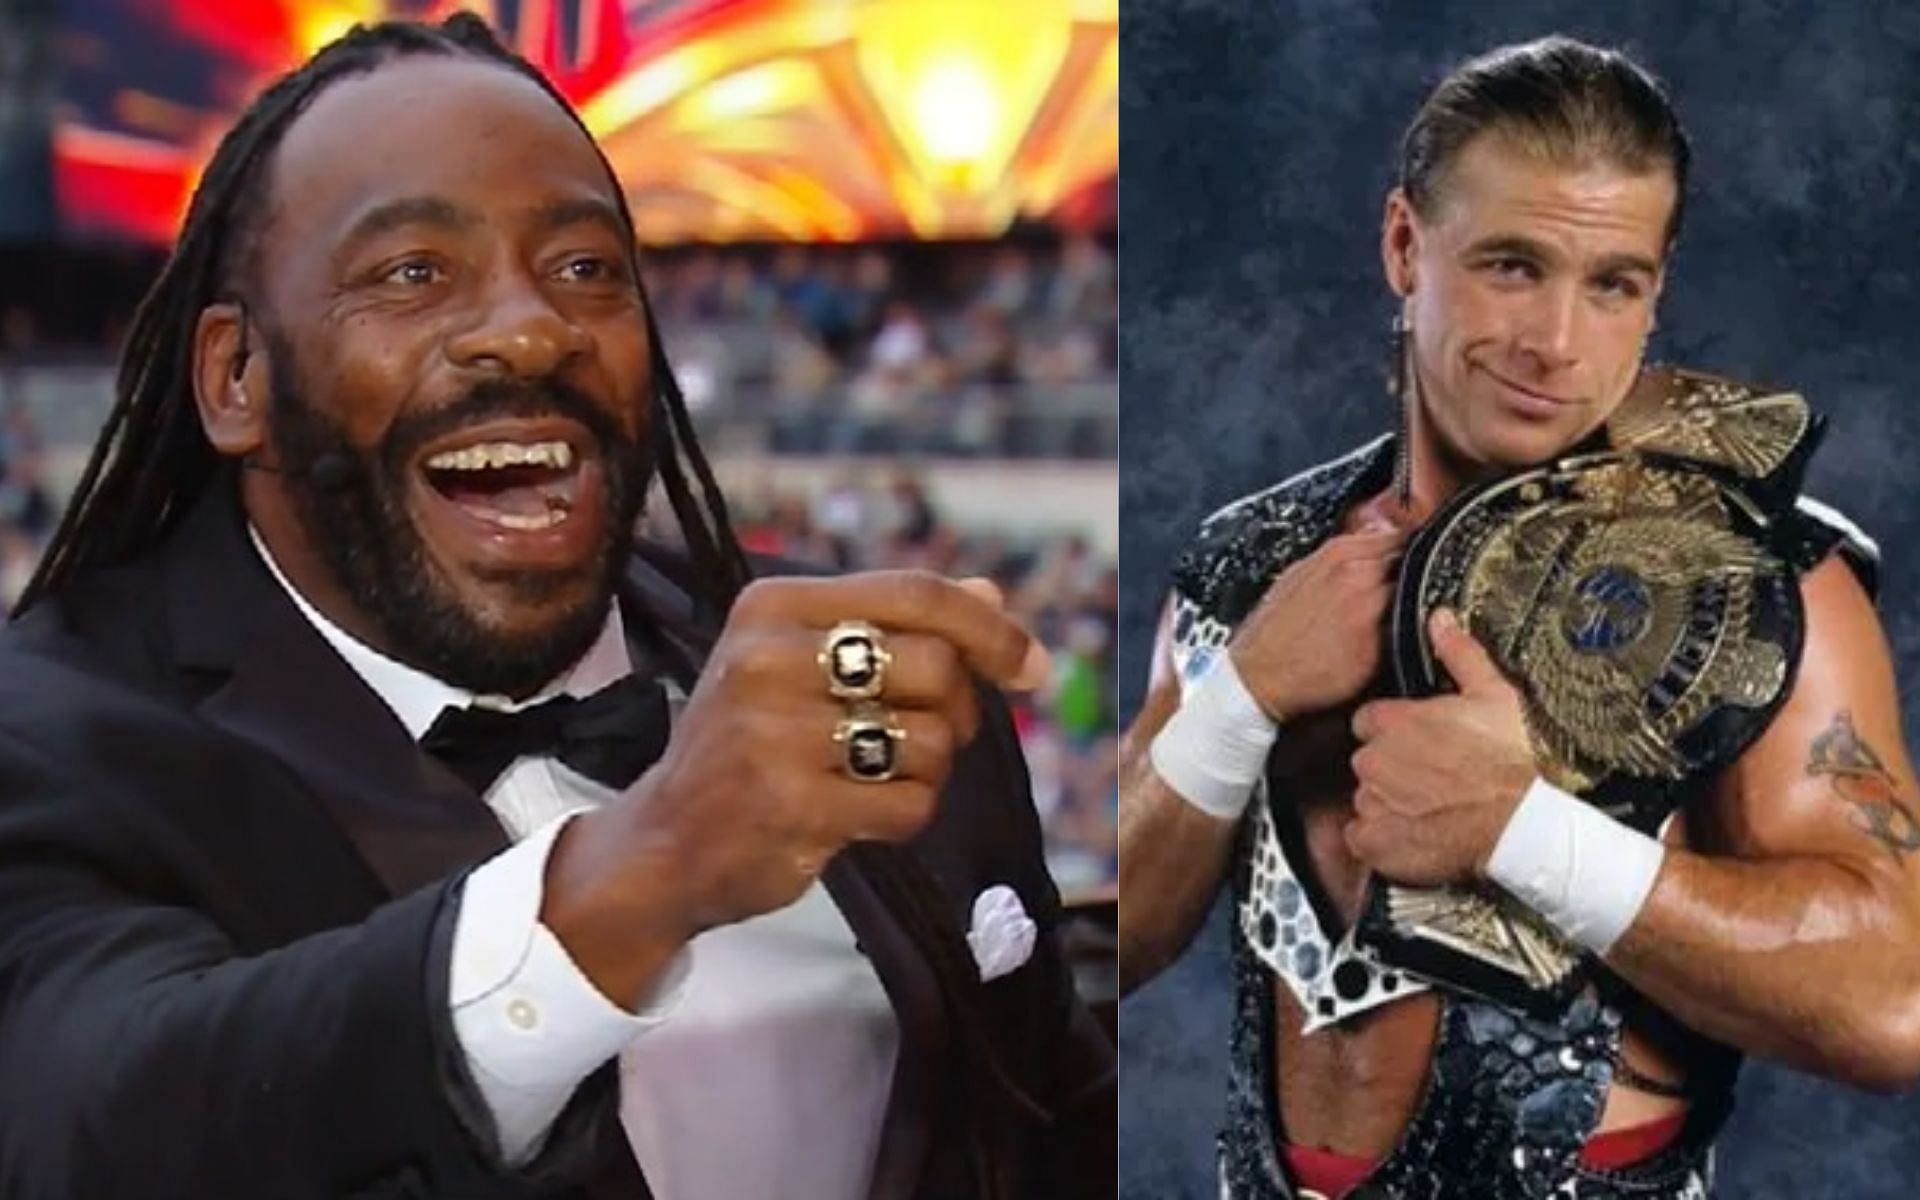 Booker T compared AEW star to Shawn Michaels